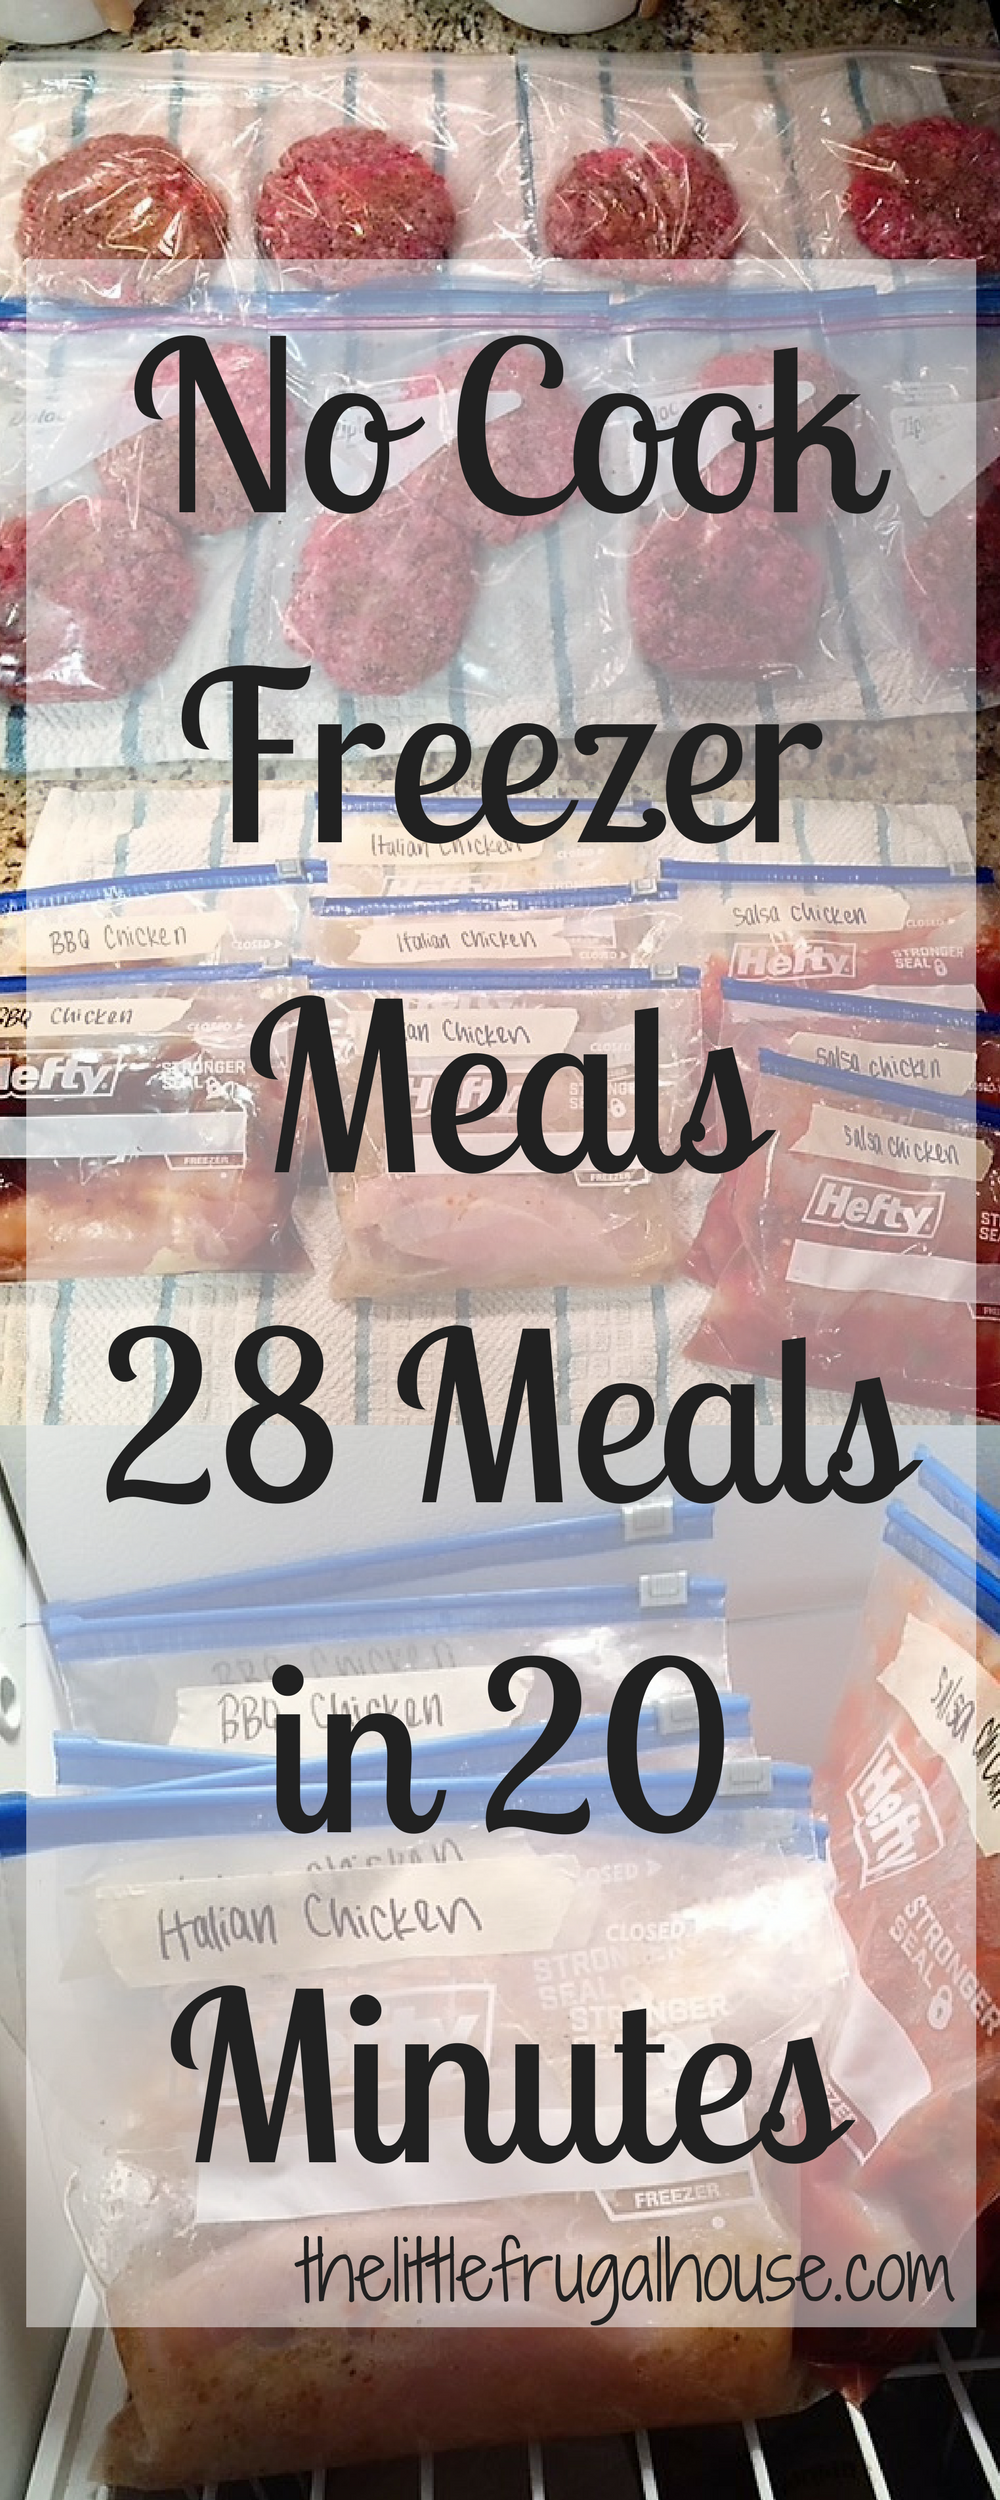 No Cook Freezer Meals 28 Meals in 20 Minutes (1) - The Little Frugal House